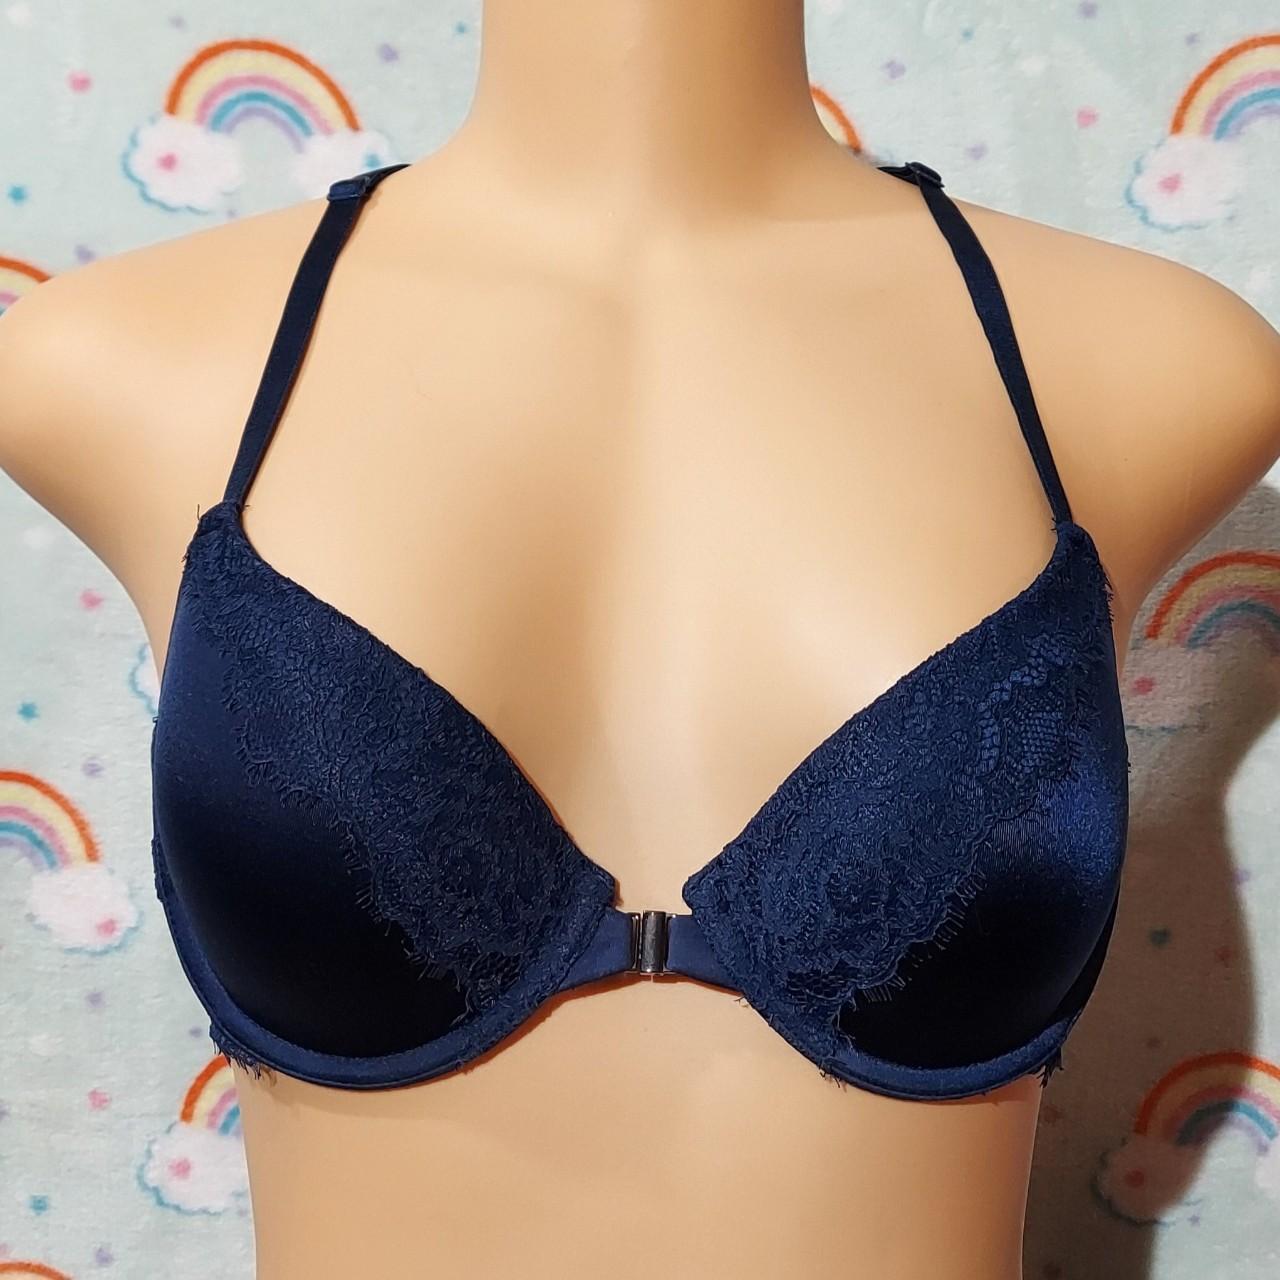 Silky navy blue front clasp racerback bra with - Depop